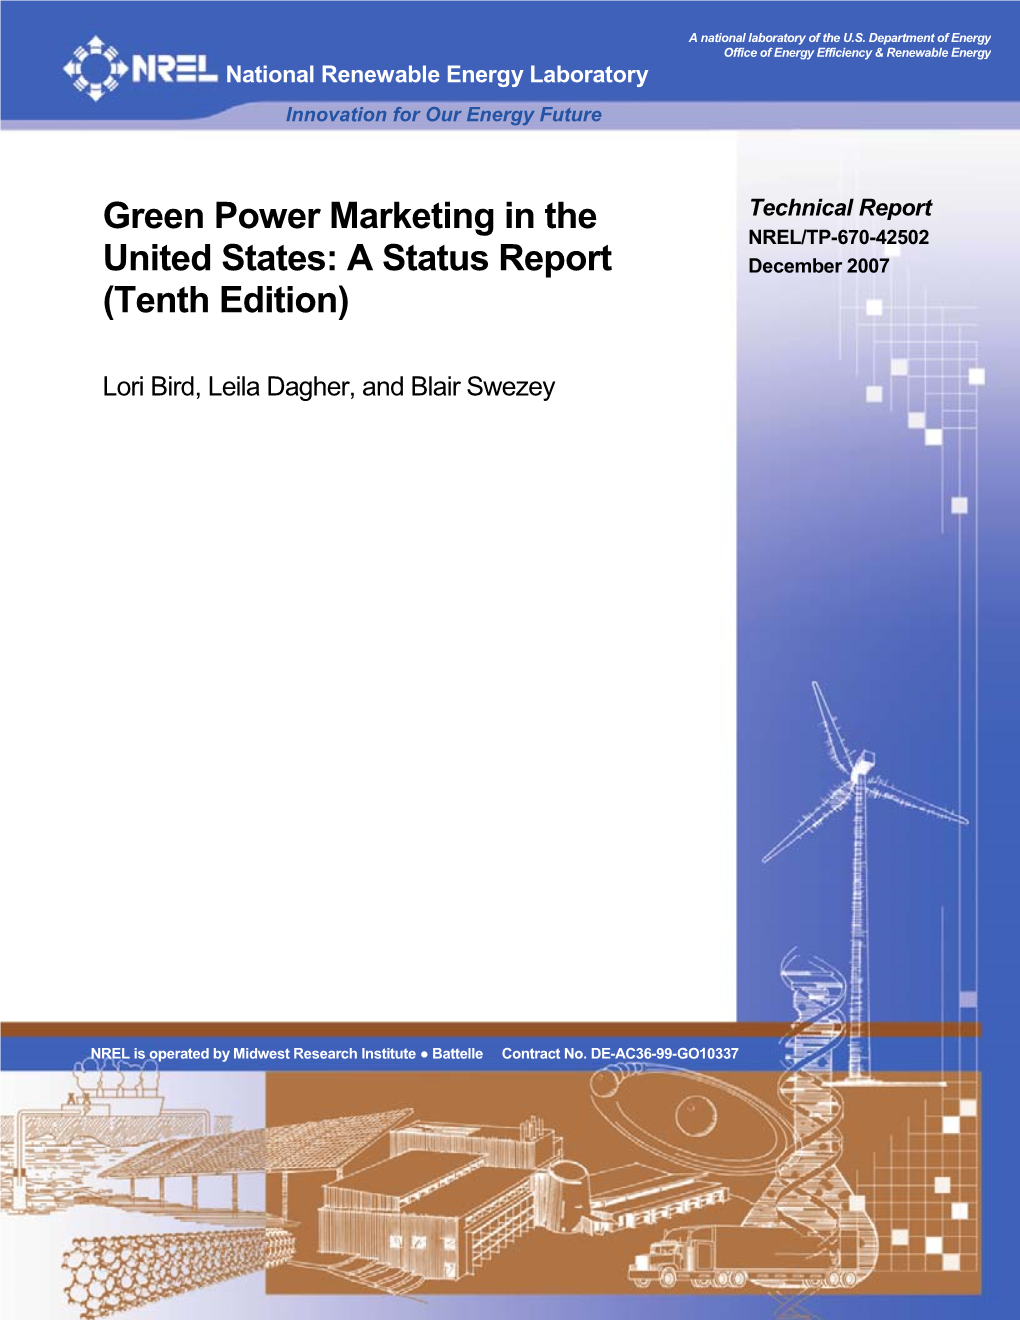 Green Power Marketing in the United States: a Status Report (Ninth Edition), NREL/TP-620-40904